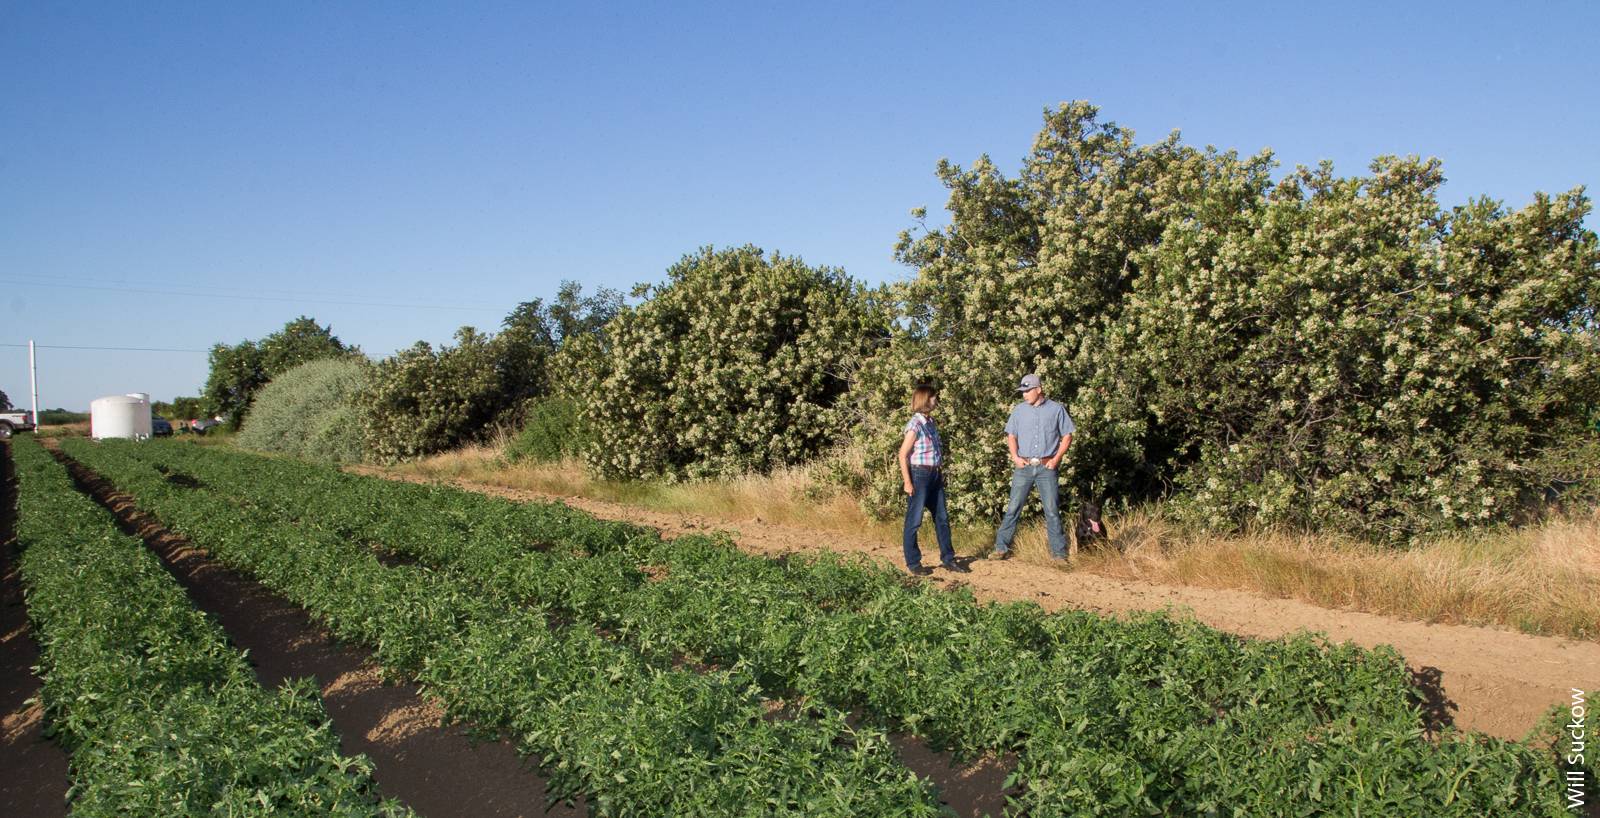 Author Rachael Long and grower Justin Rominger walk a hedgerow adjacent to a tomato field in Yolo County. Research suggests that hedgerow adoption is positively influenced by technical support from conservation agencies as well as by grower-to-grower communication.